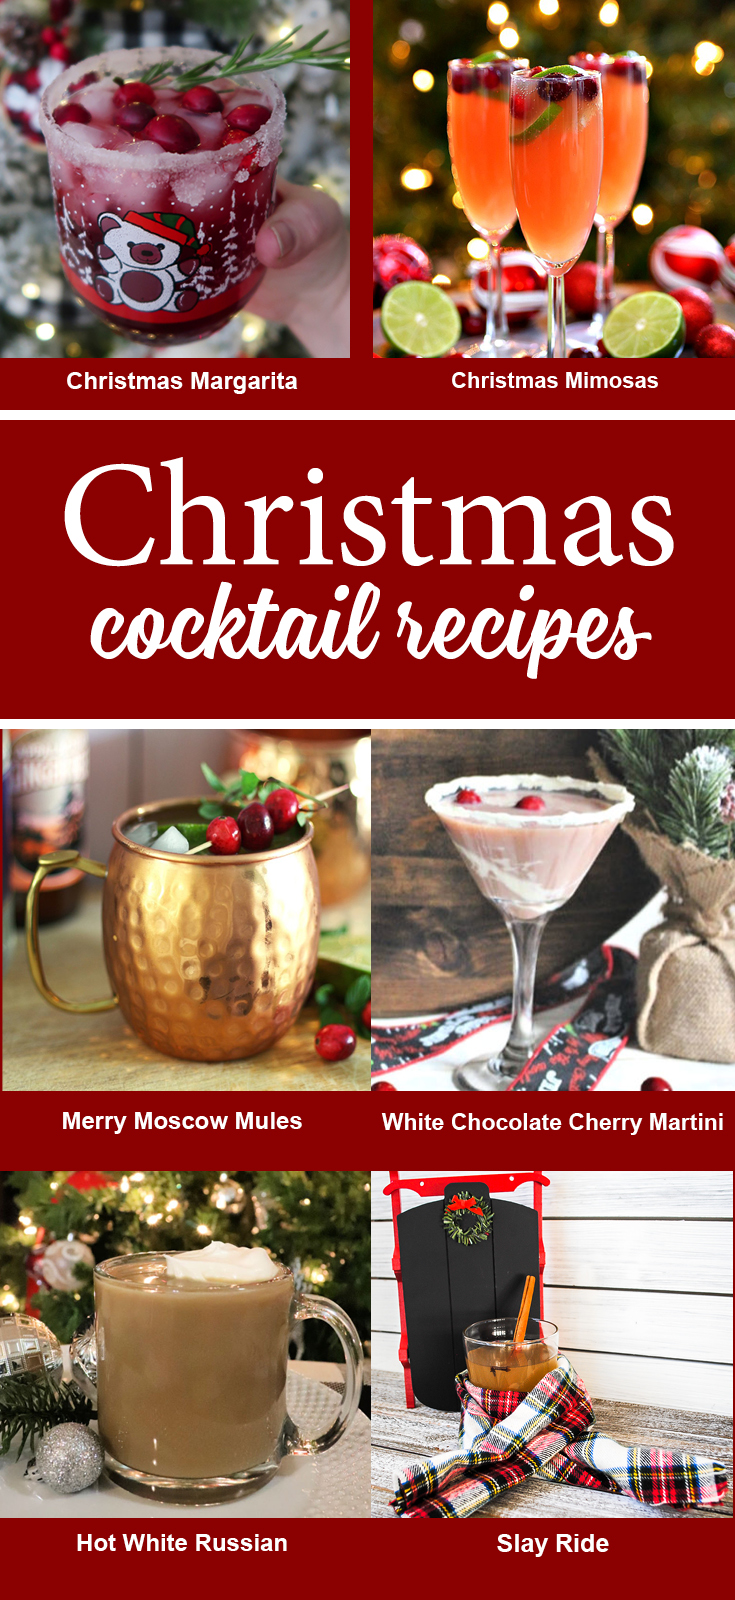 6 Christmas cocktail recipes collage